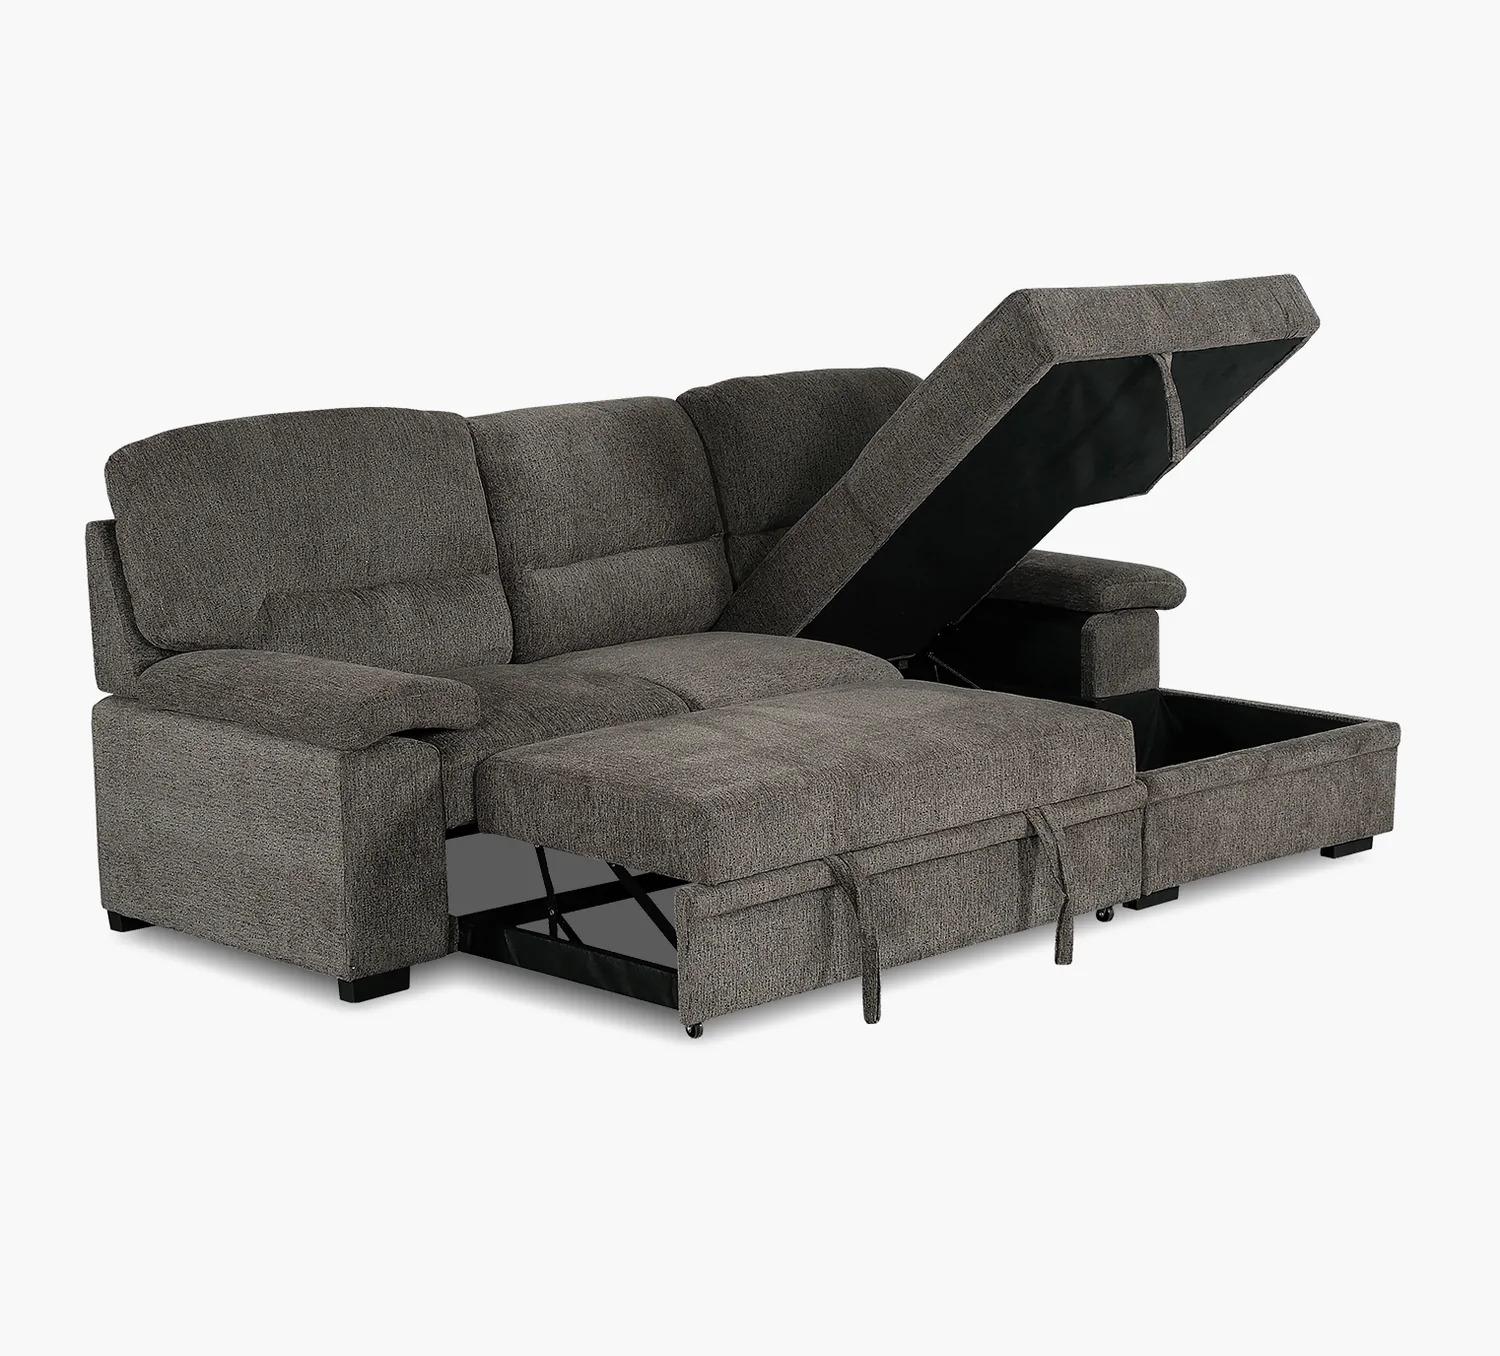 Media Sofa with Pull Out Pop Up Ottoman and Storage Chaise in Gray